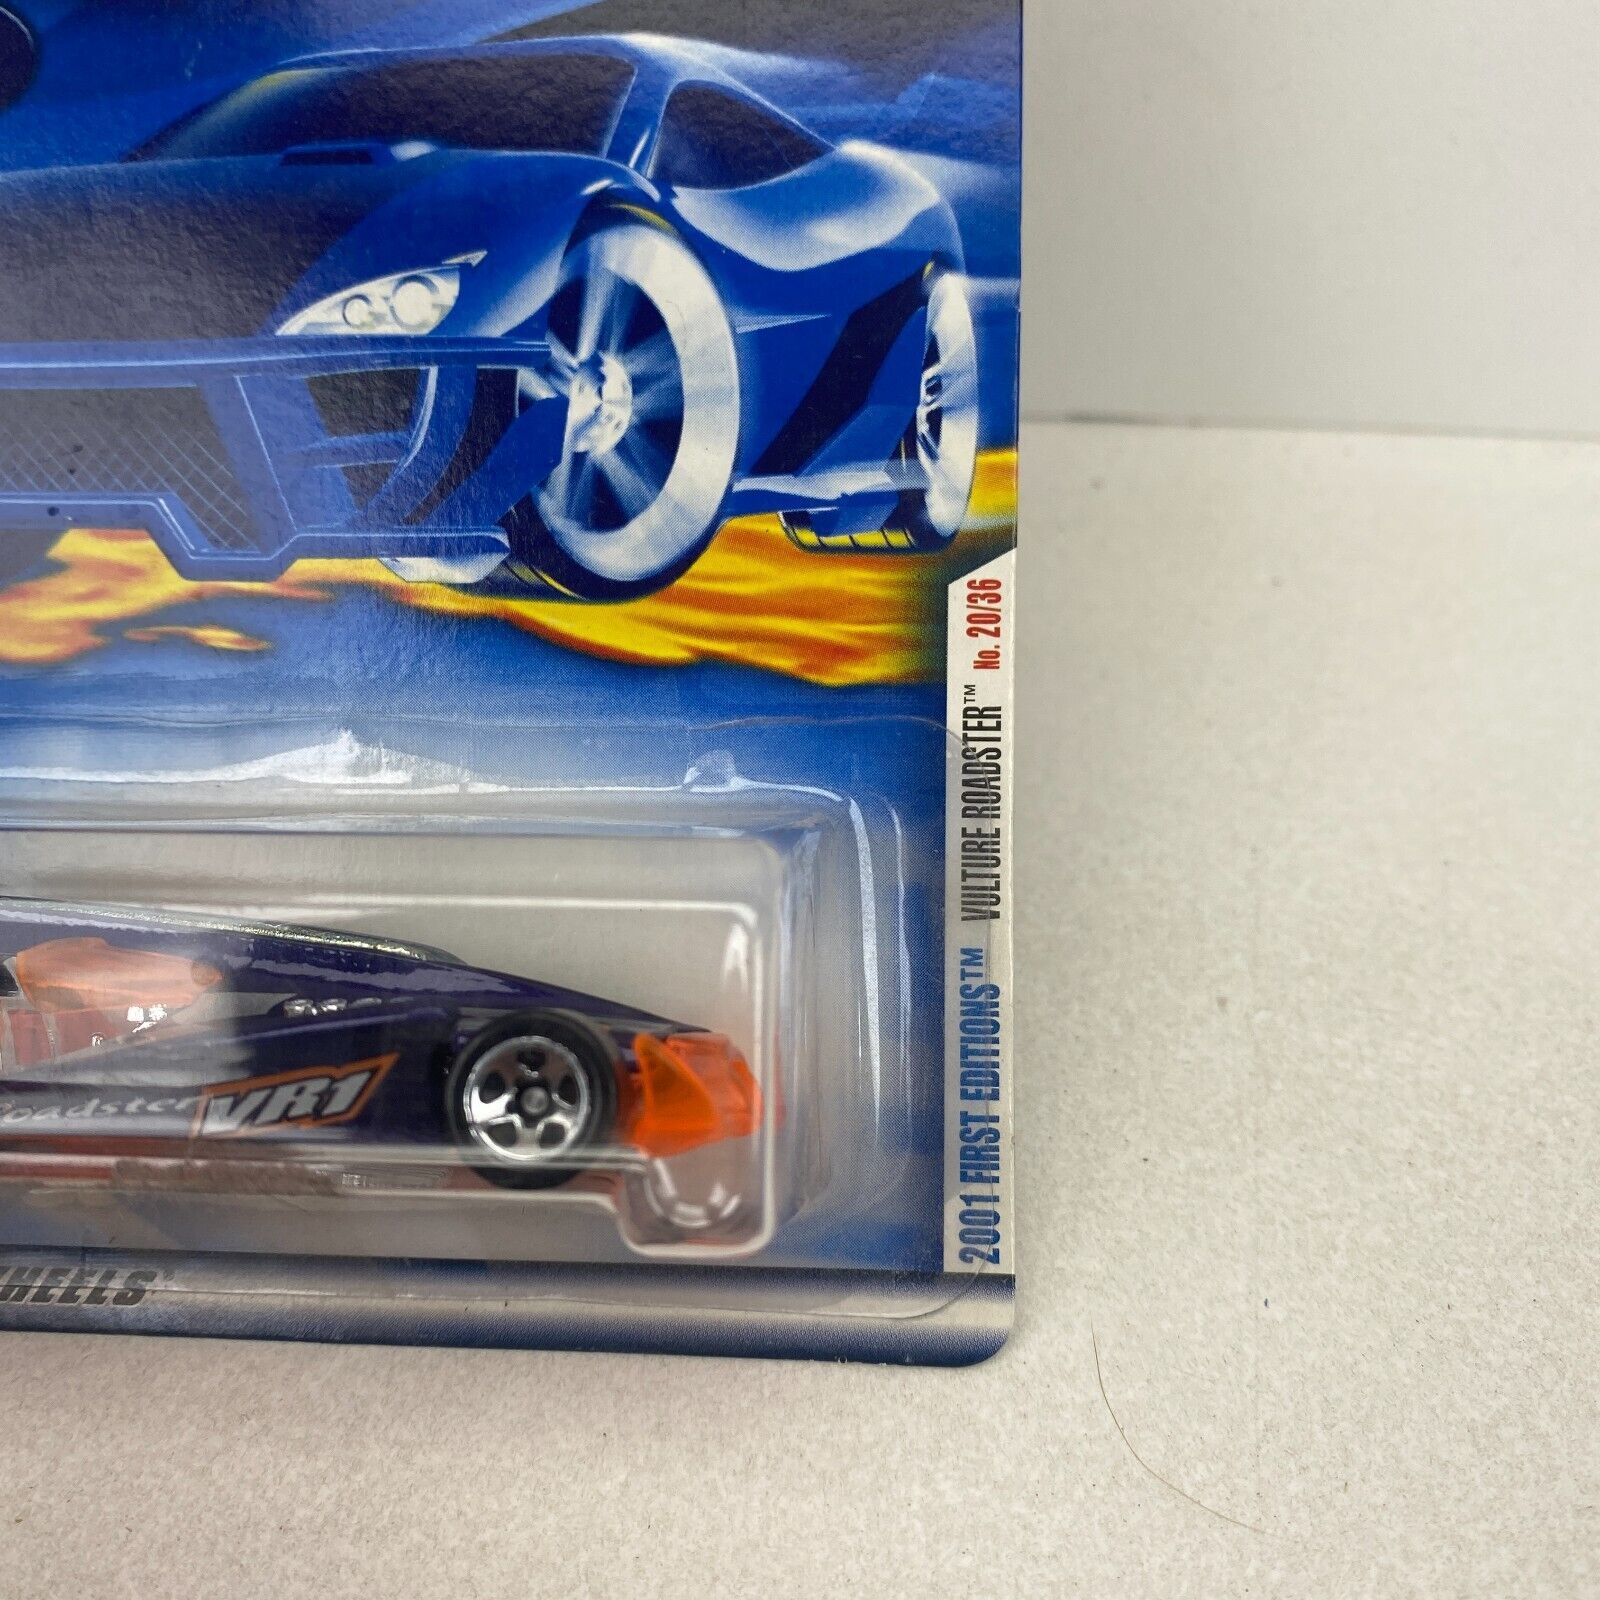 Primary image for 2001 Hot Wheels Vulture Roadster First Editions #032